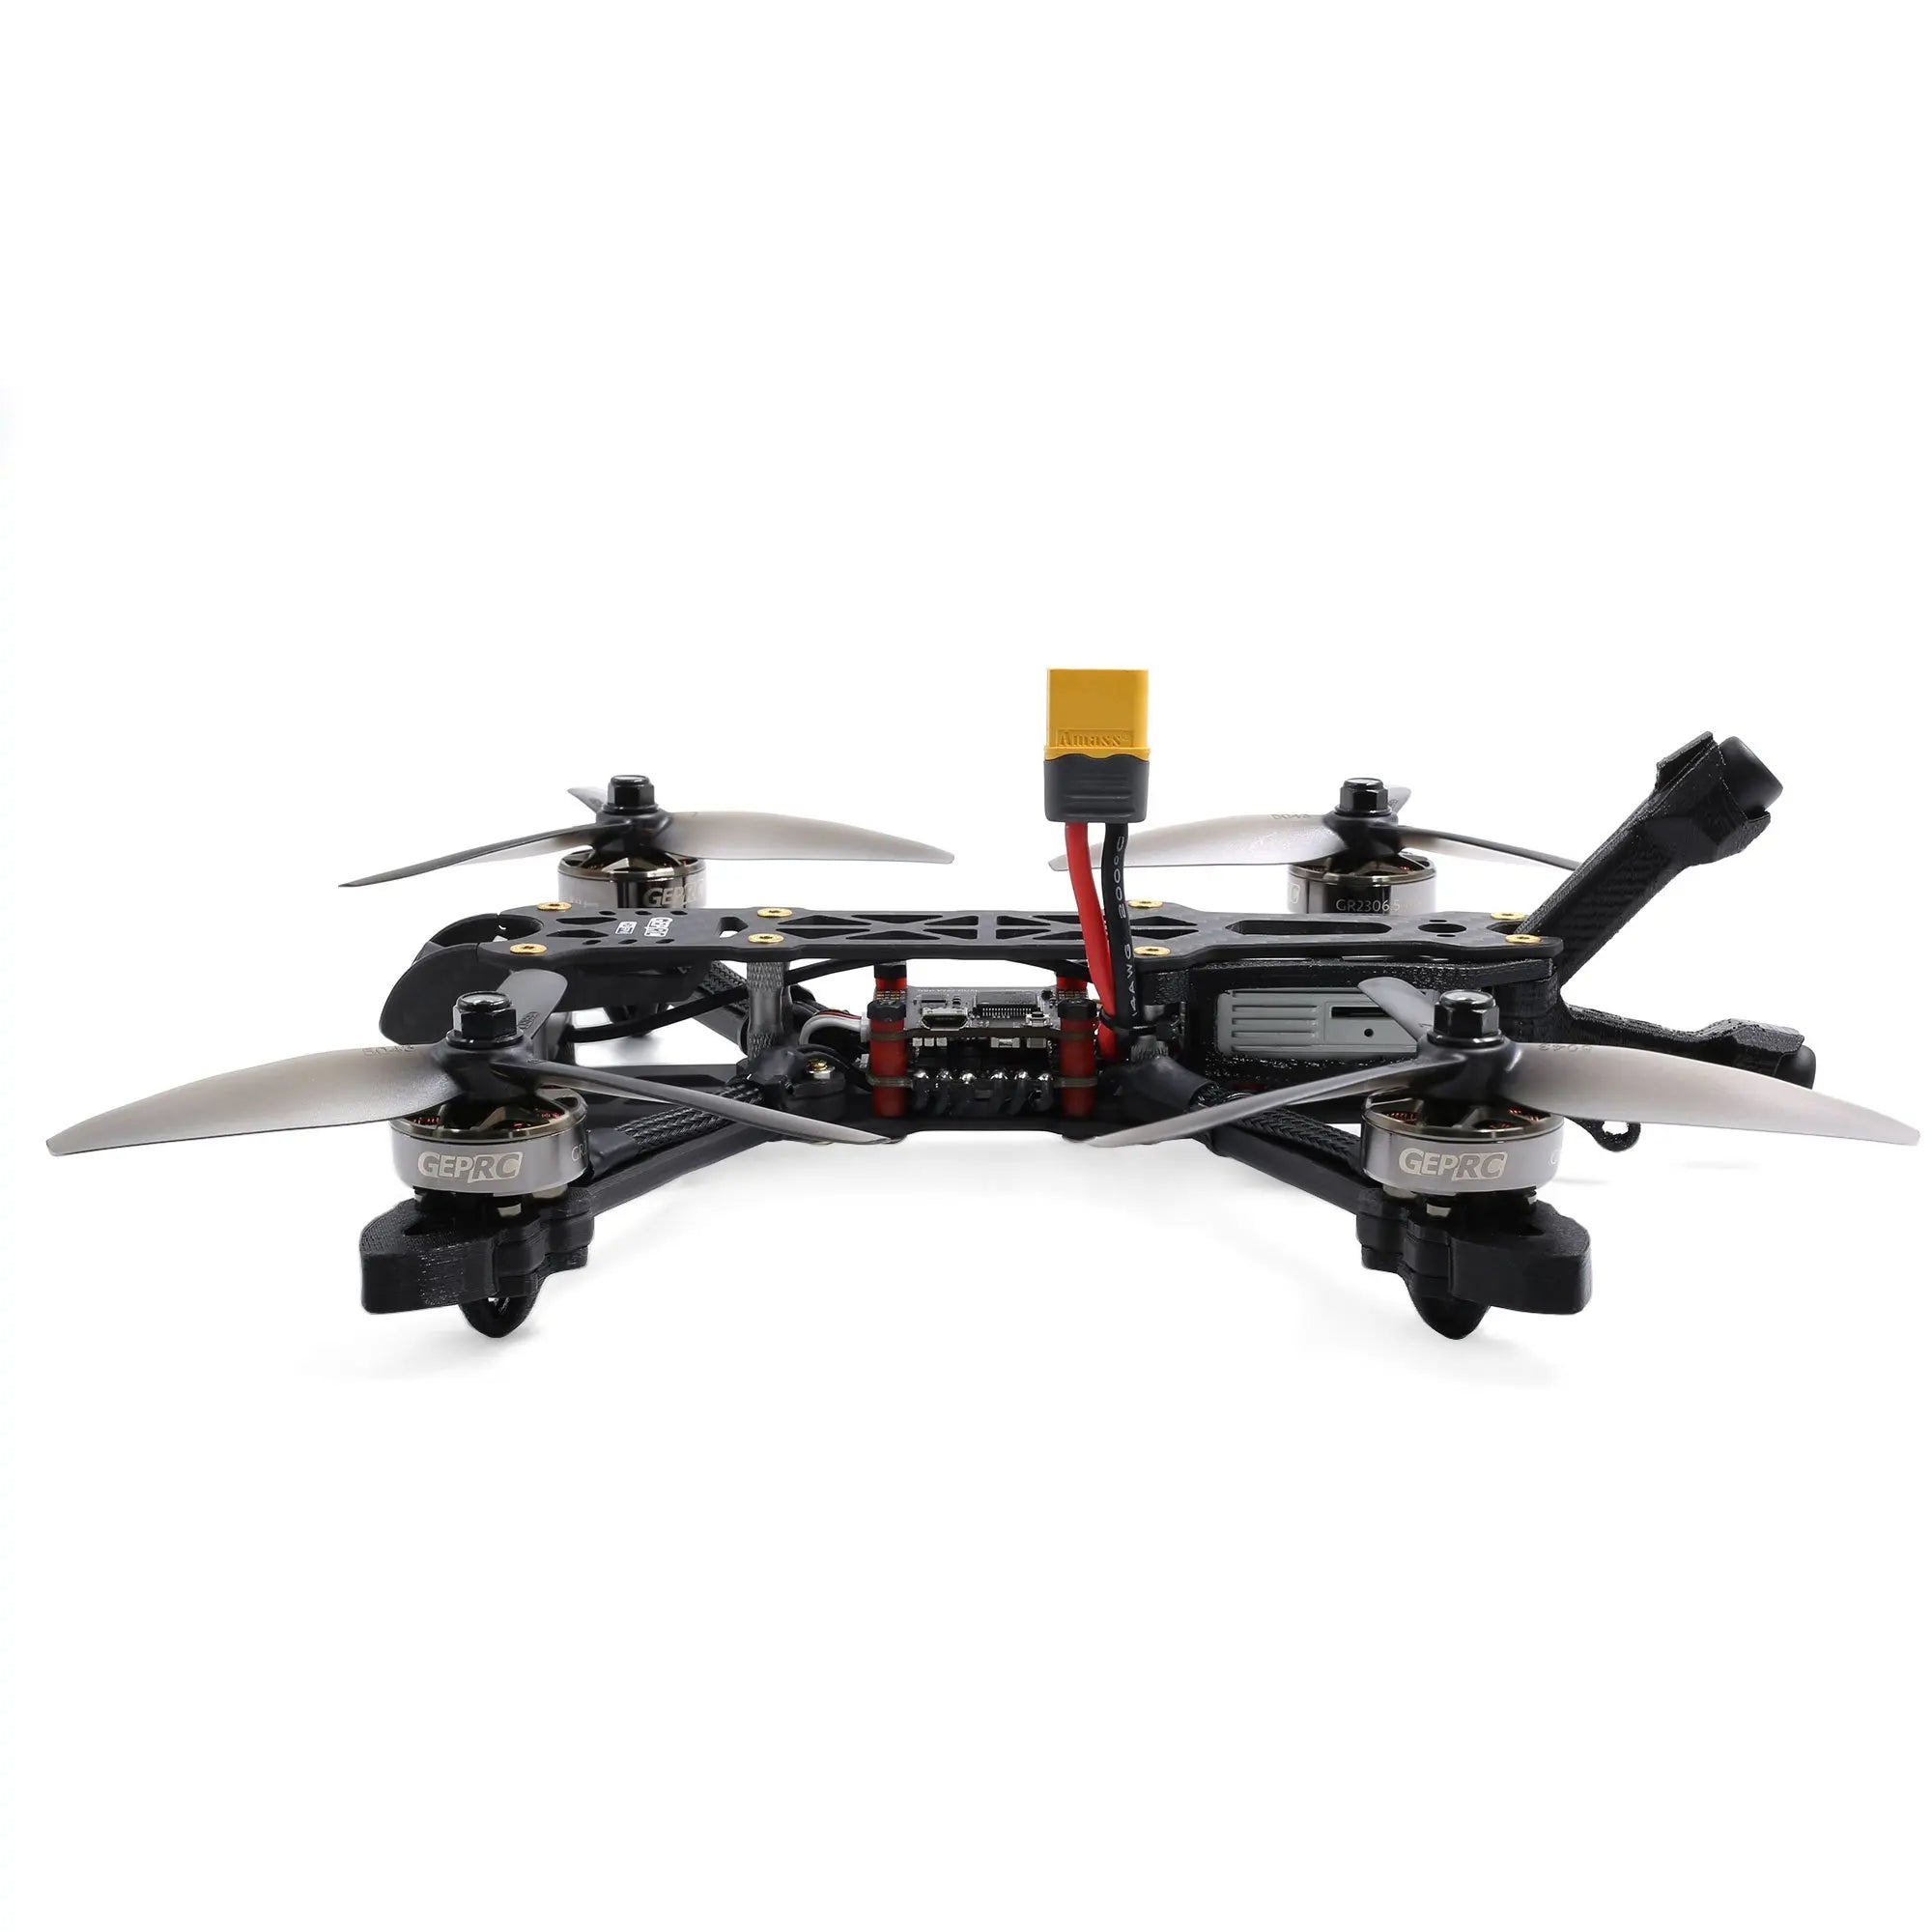 GEPRC MARK4 FPV Drone, SpeedyBee APP downloads for android, ios and ipad